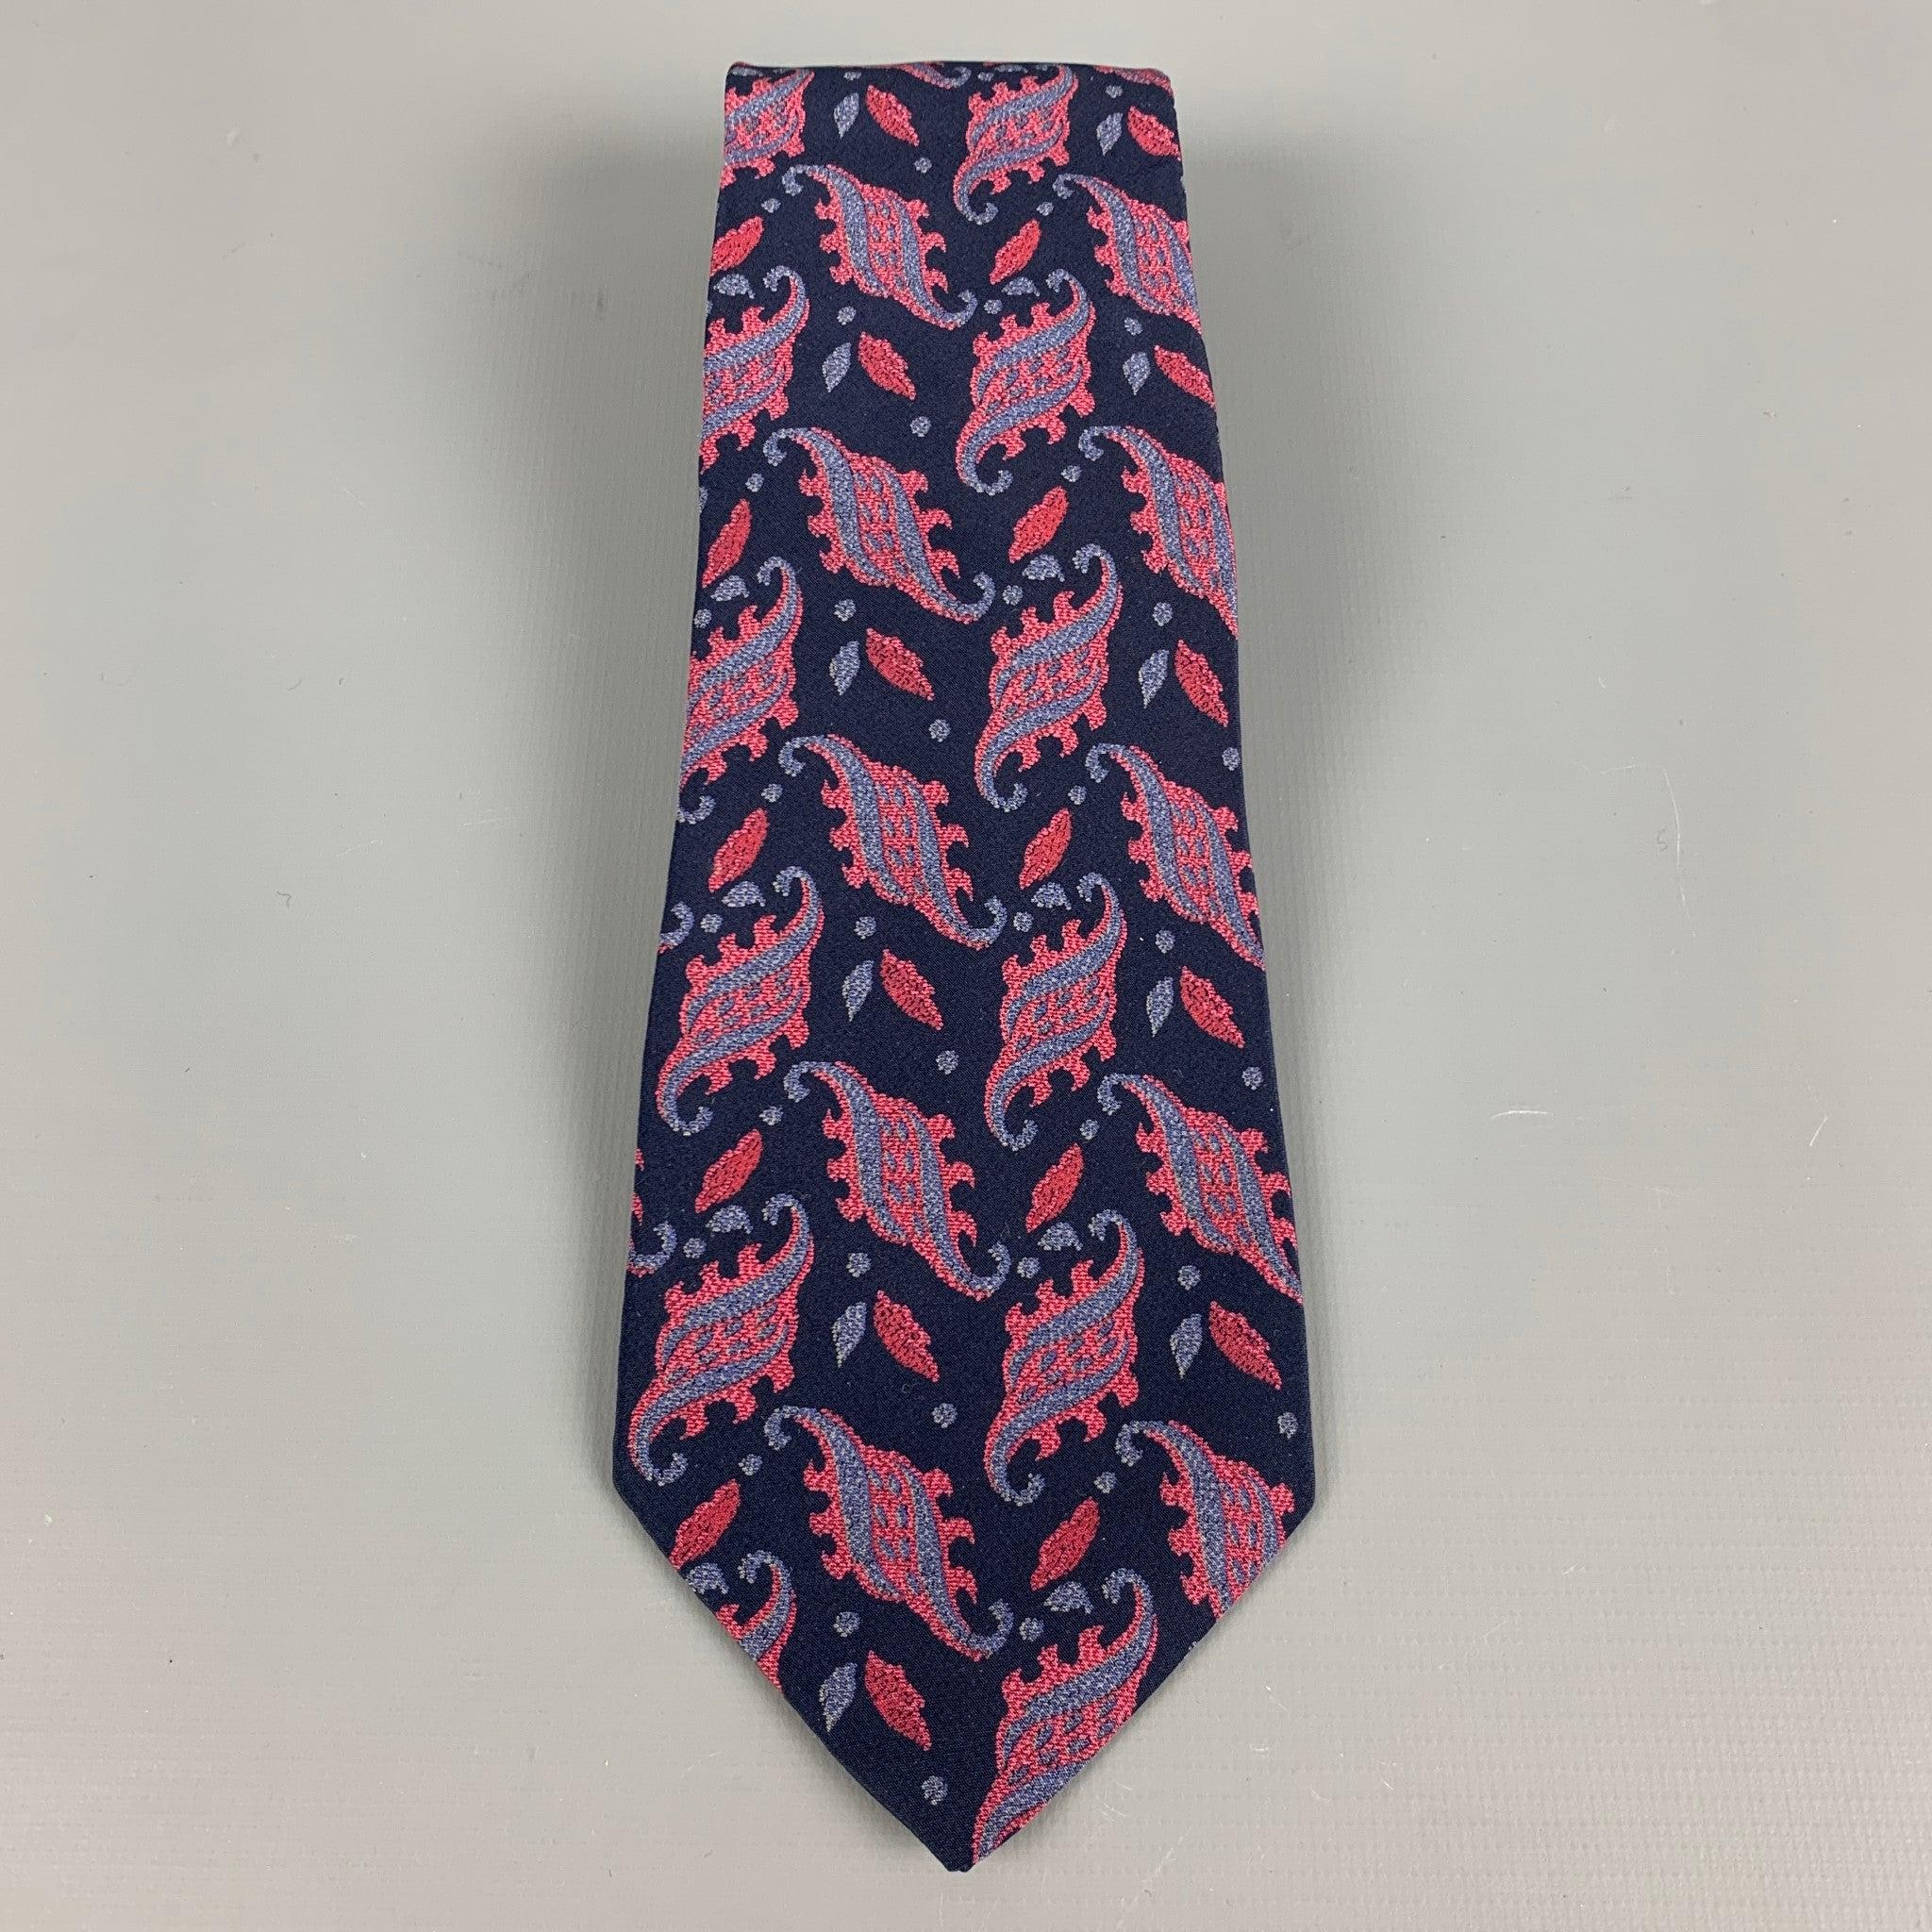 VALENTINO
necktie in a navy silk fabric featuring multi-color paisley print. Made in Italy.Excellent Pre-Owned Condition. 

Measurements: 
  Width: 3 inches Length: 59 inches 
  
  
 
Reference: 127789
Category: Tie
More Details
    
Brand: 